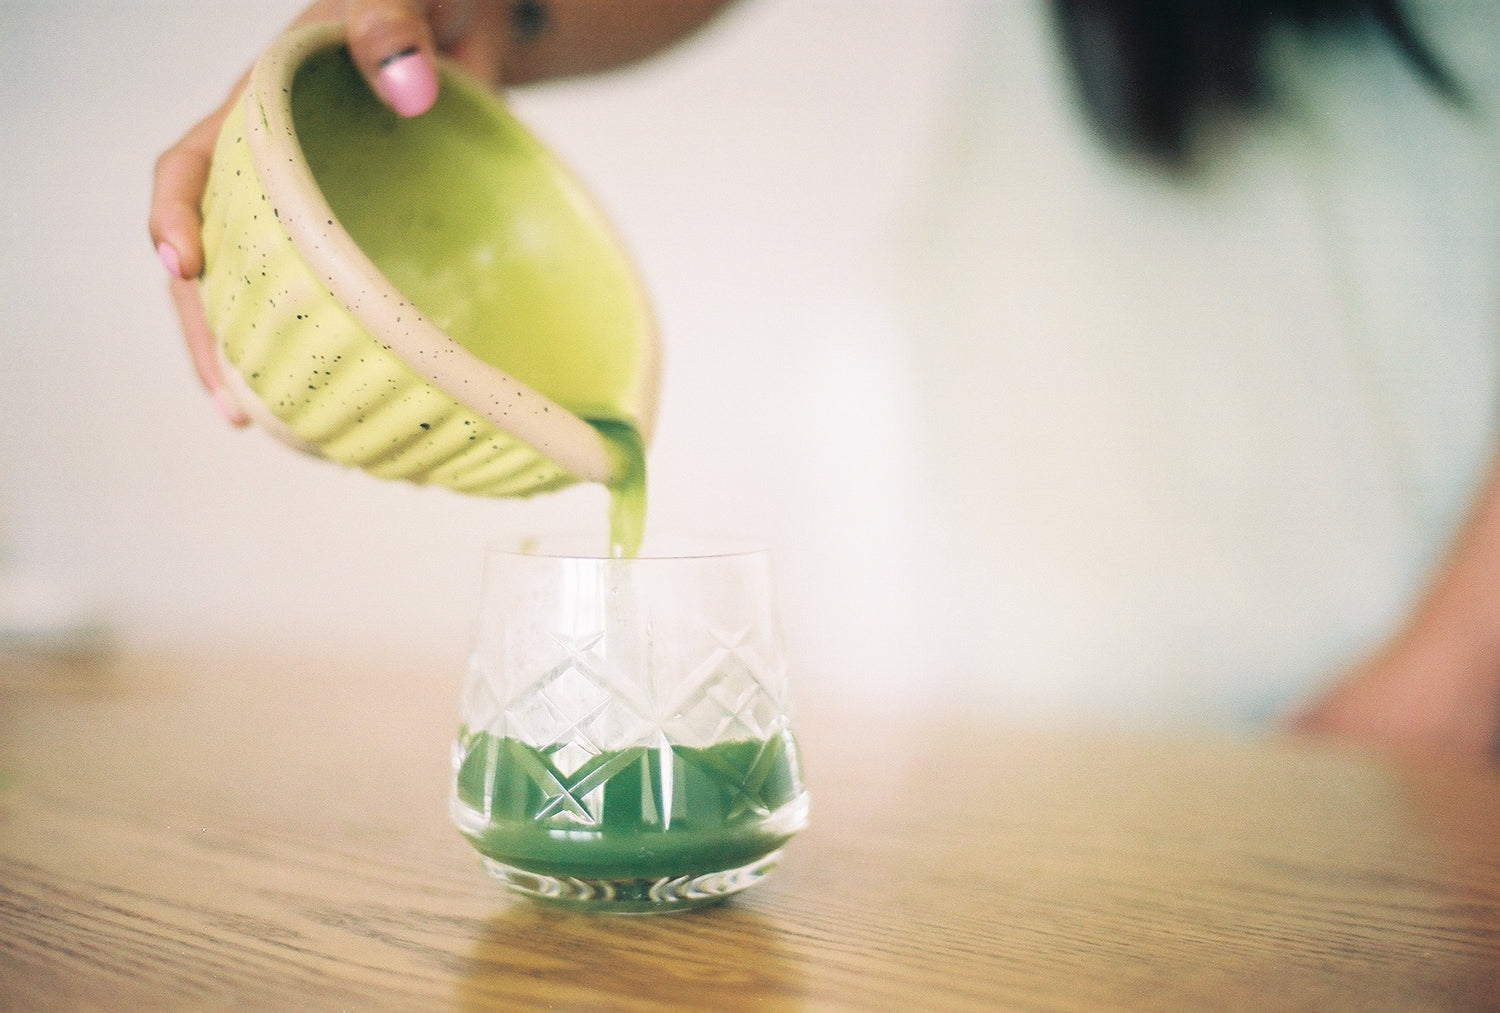 this is a picture of Ami Mei's ceremonial matcha - It has a deep green, emerald color, and delicious taste.